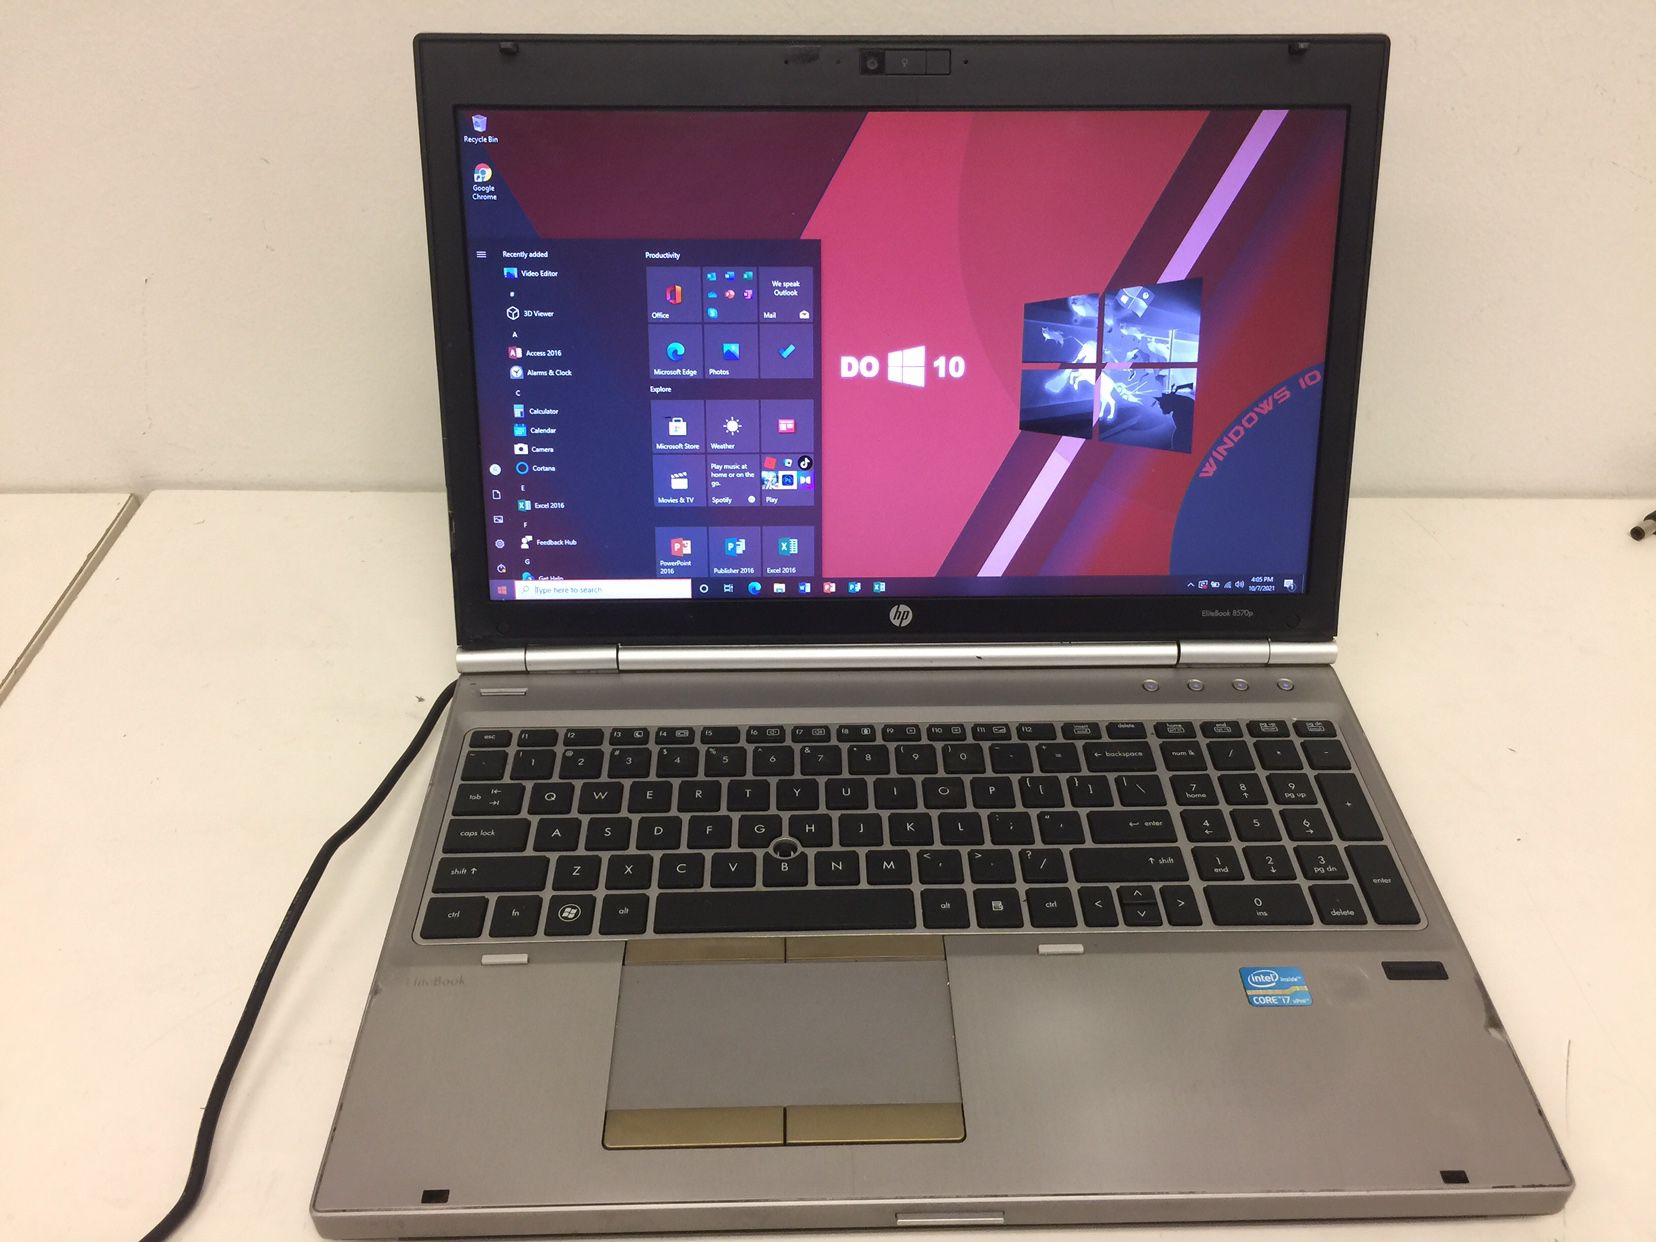 Laptop Hp Elitebook 15.6” i7 Cpu 8gb 128gb Ssd Hd Win 10 Ms Office With Charger